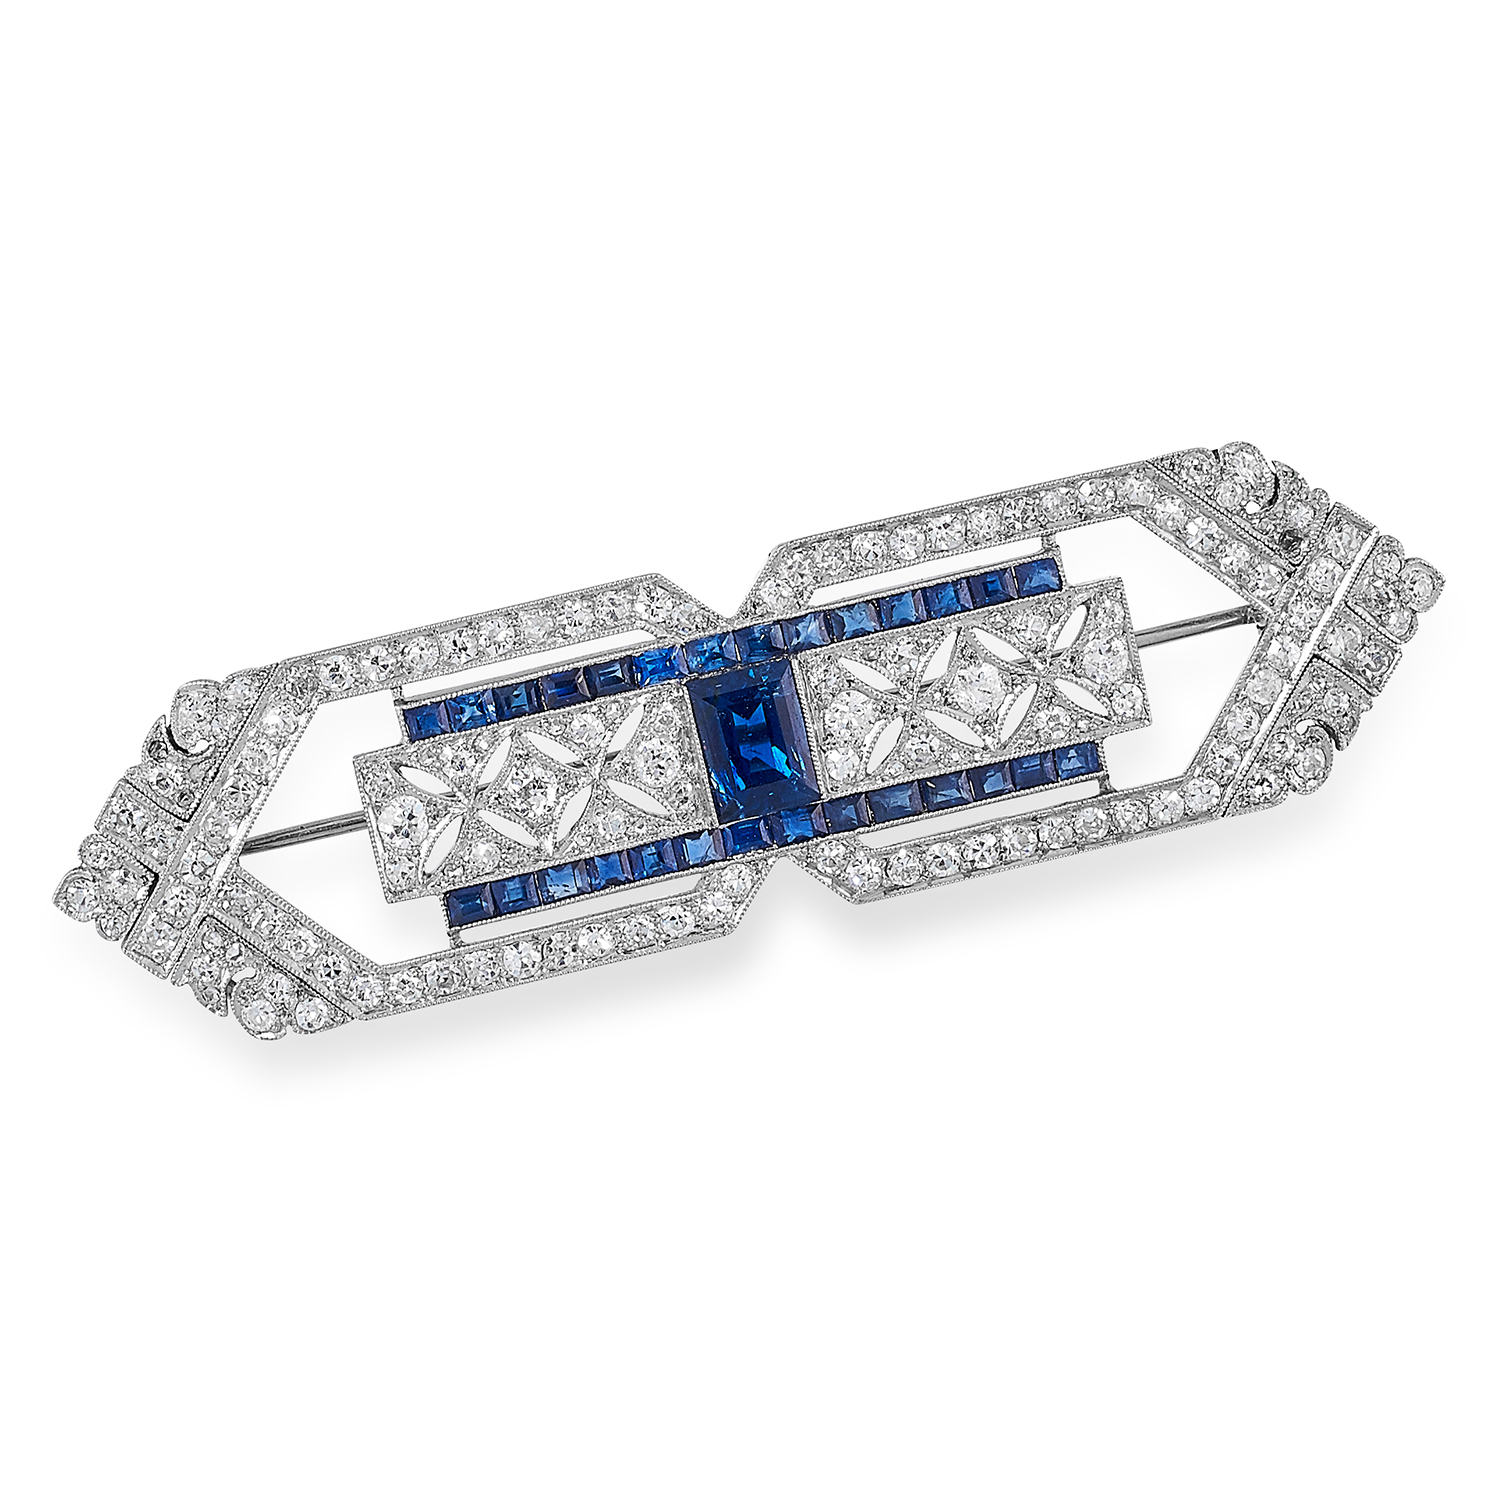 AN ART DECO DIAMOND AND SAPPHIRE BROOCH set with step cut sapphires and round cut diamonds, signed